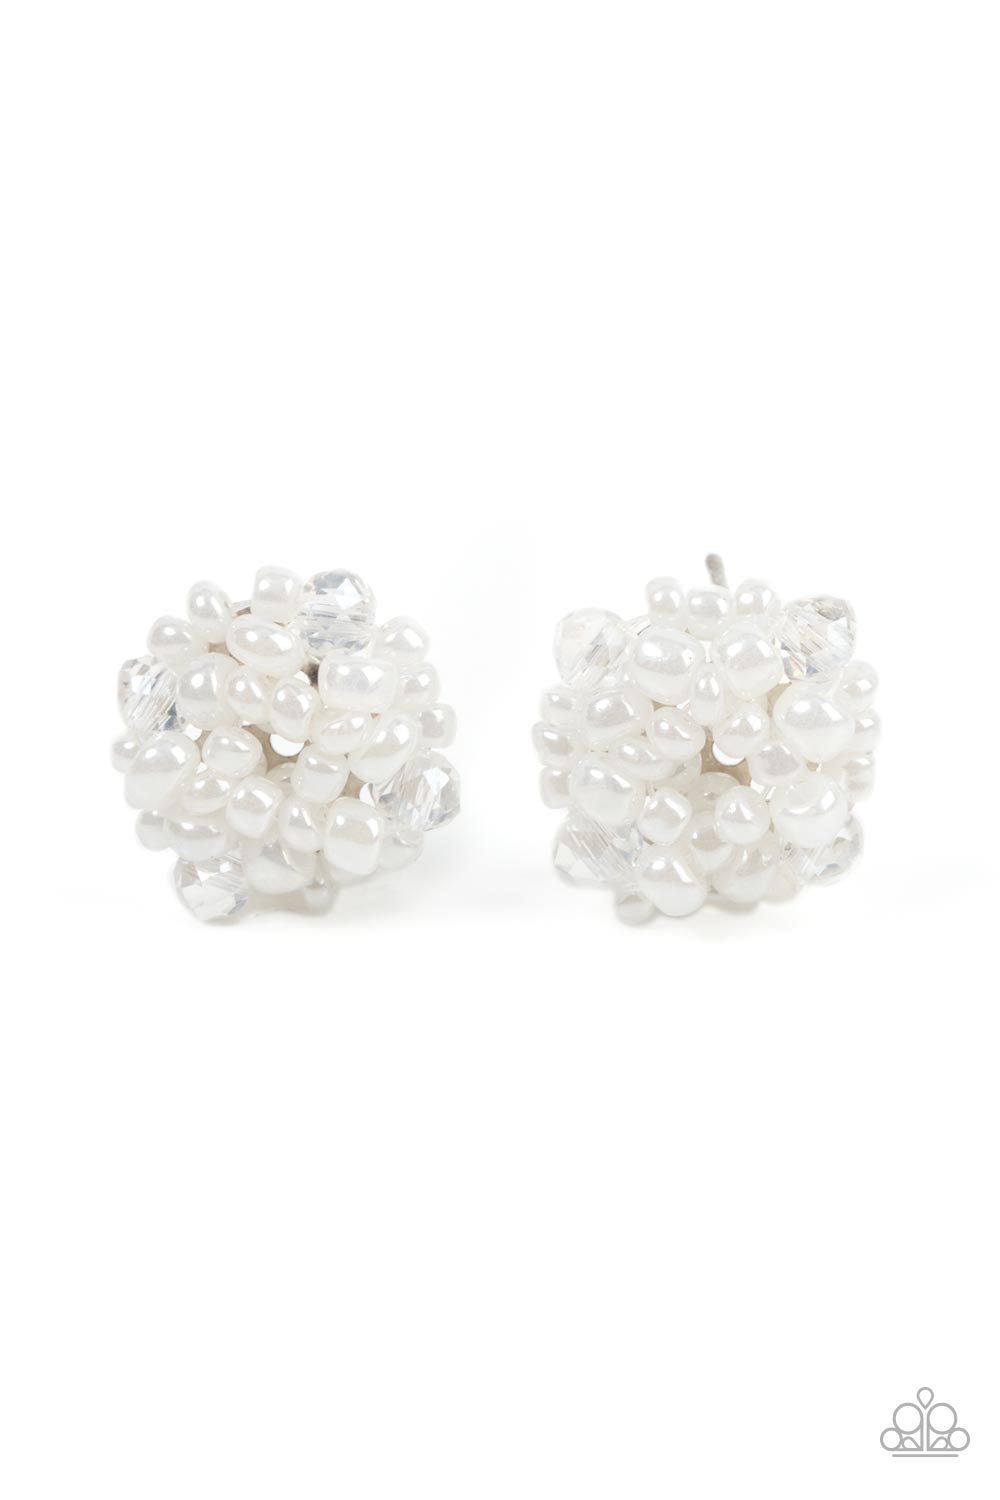 Bunches of Bubbly - White seed bead post earrings